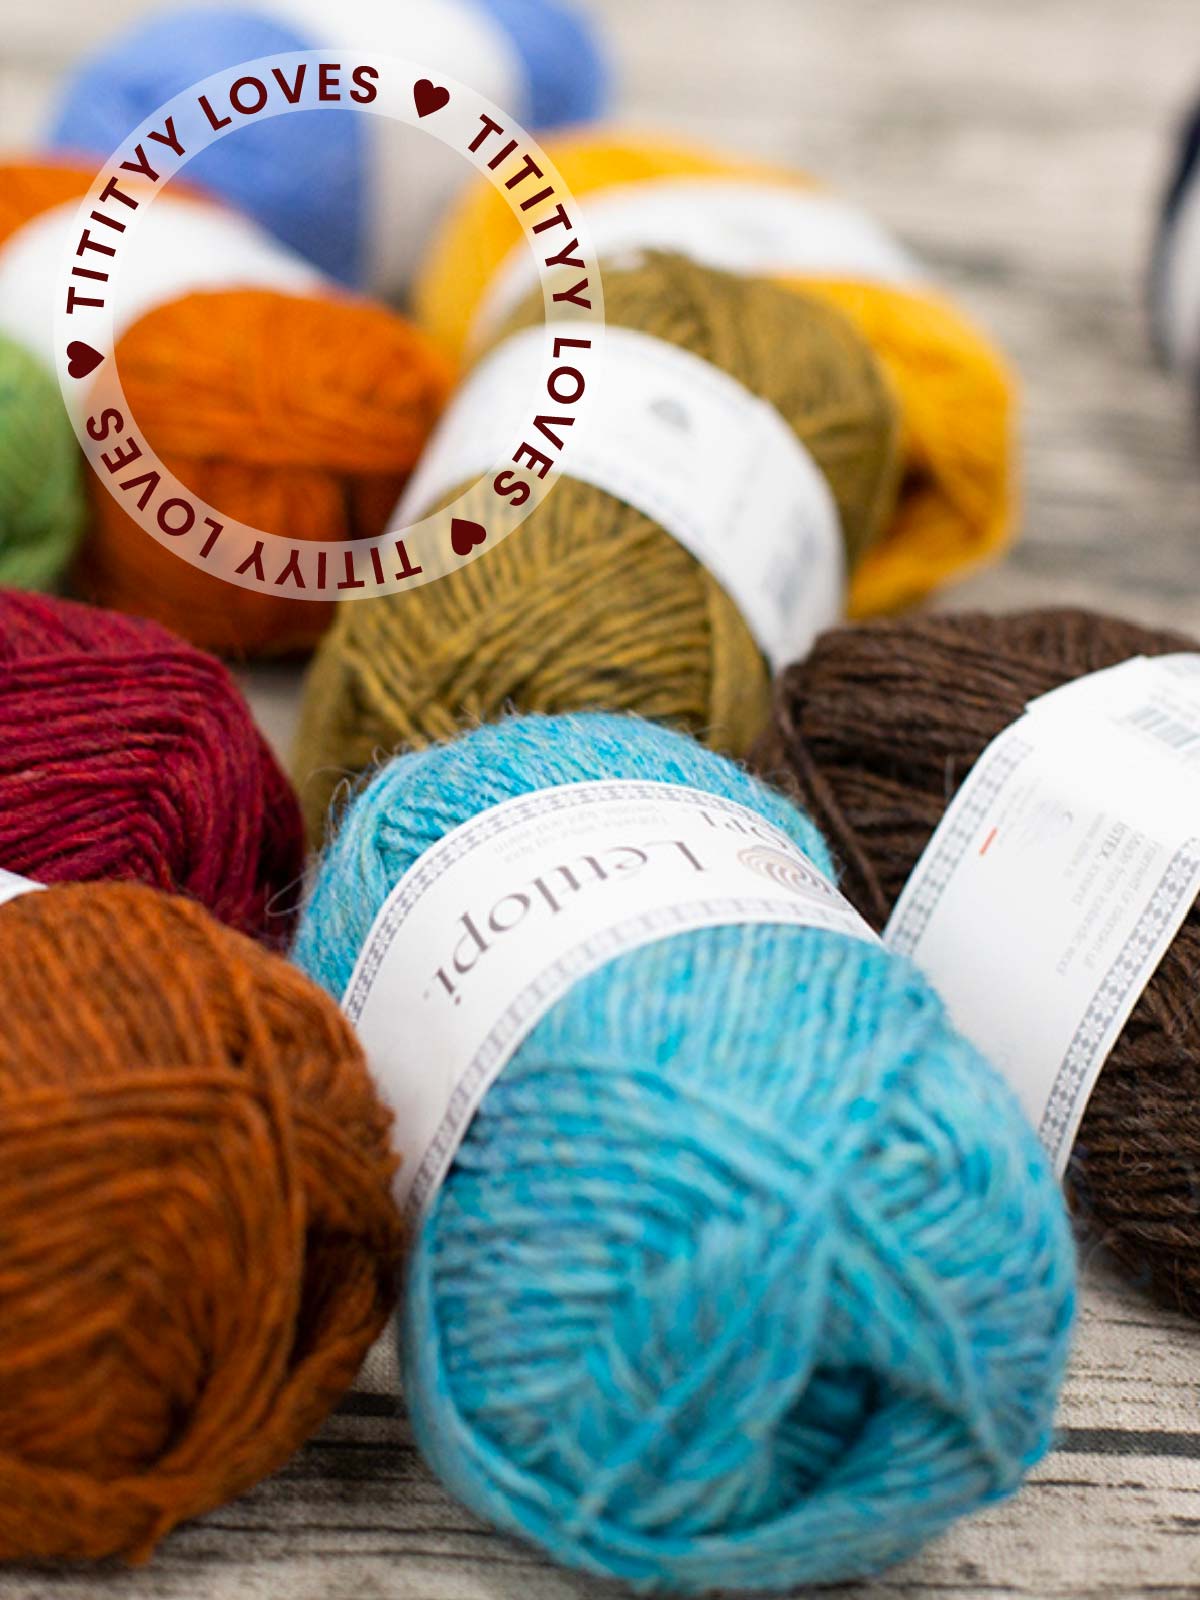 Knitting For Olive arrives at Titityy! - Lankakauppa Titityy - Titityy  Online Yarn Shop